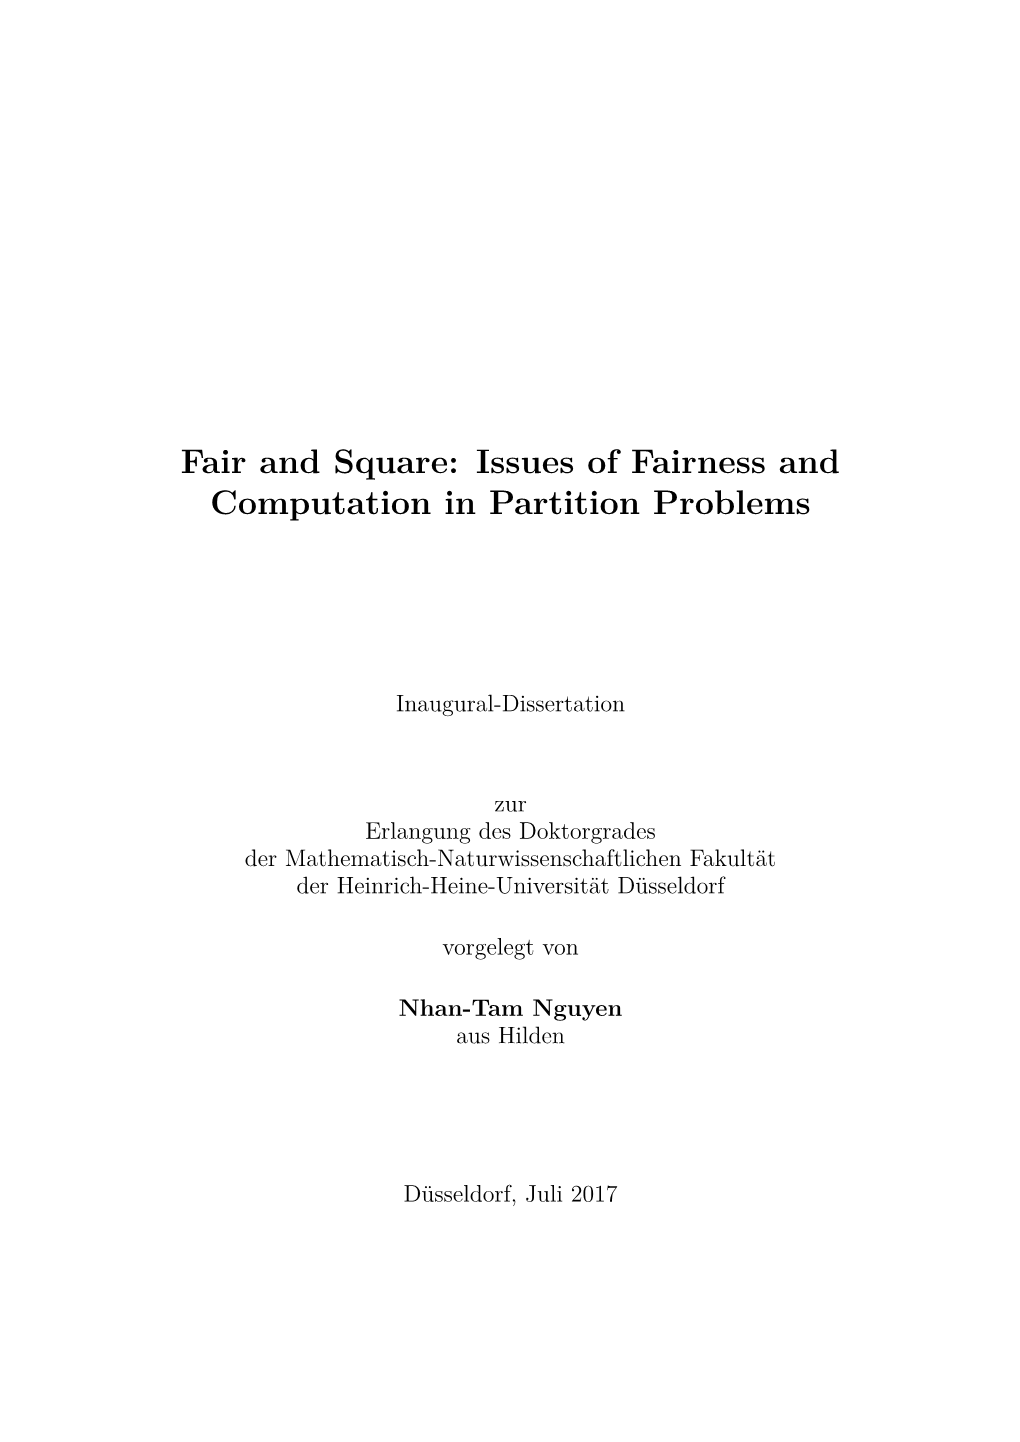 Issues of Fairness and Computation in Partition Problems